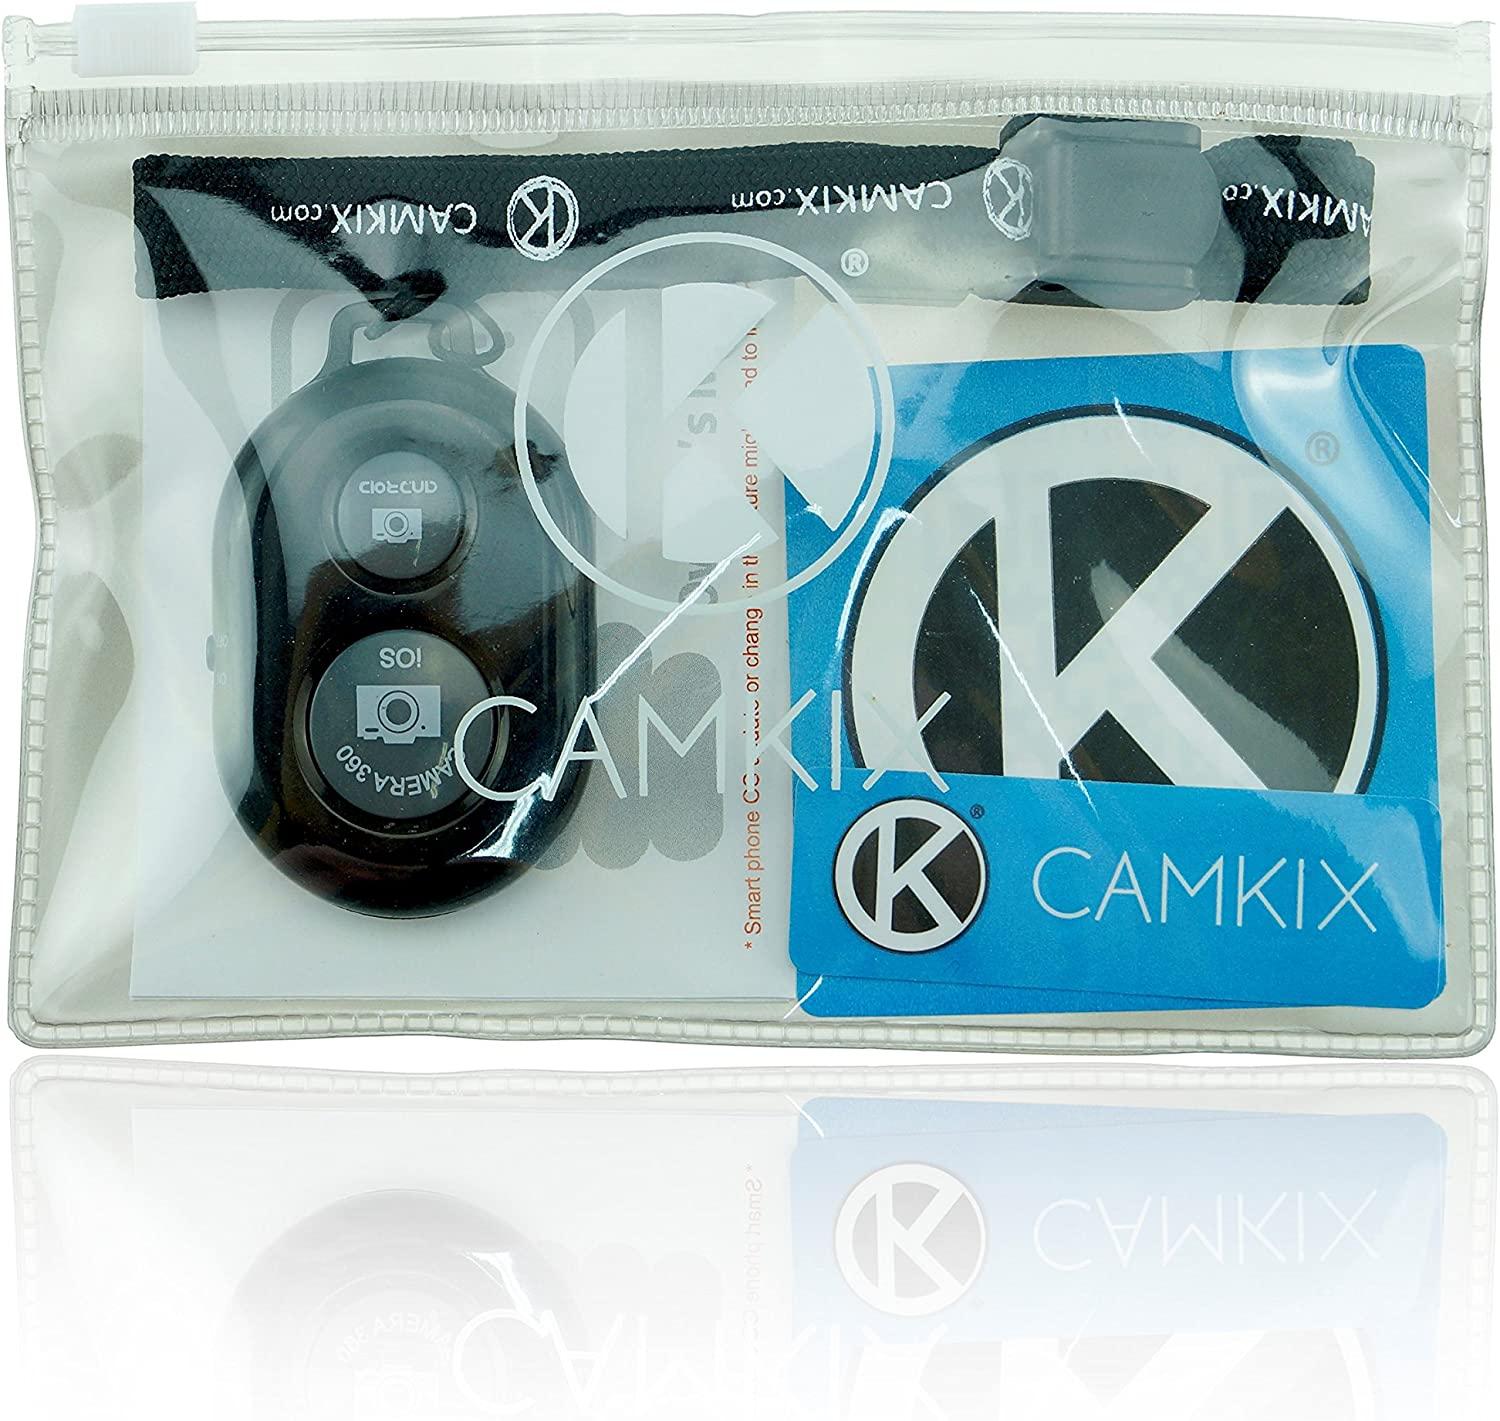 CamKix Camera Shutter Remote Control with Bluetooth Wireless Technology -  Create Amazing Photos and Videos Hands-Free - Works with Most Smartphones